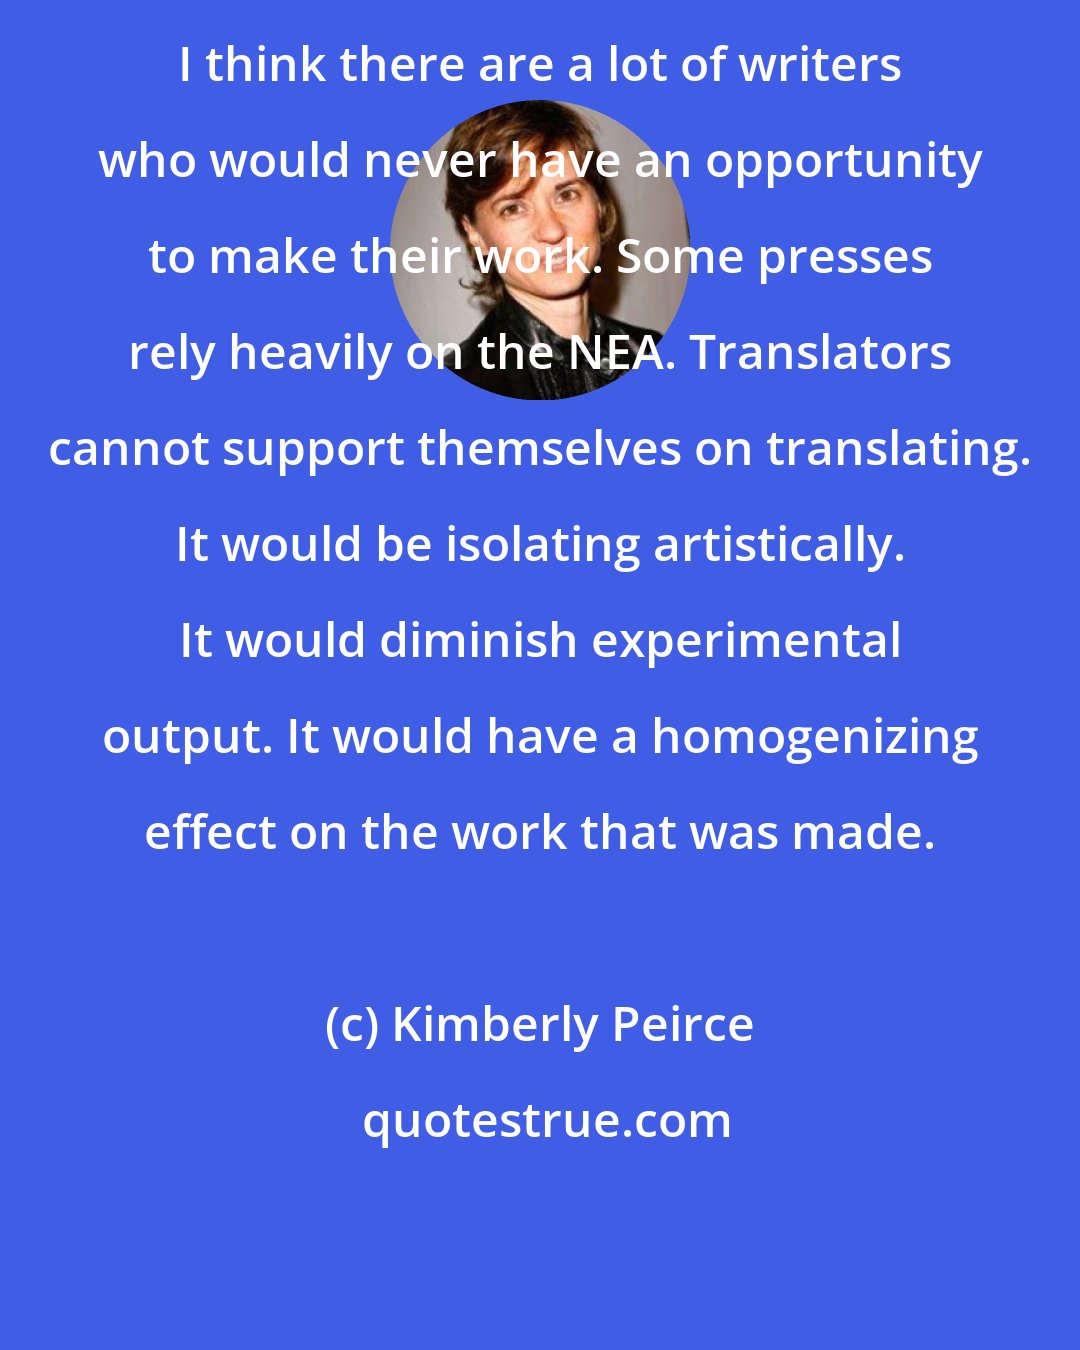 Kimberly Peirce: I think there are a lot of writers who would never have an opportunity to make their work. Some presses rely heavily on the NEA. Translators cannot support themselves on translating. It would be isolating artistically. It would diminish experimental output. It would have a homogenizing effect on the work that was made.